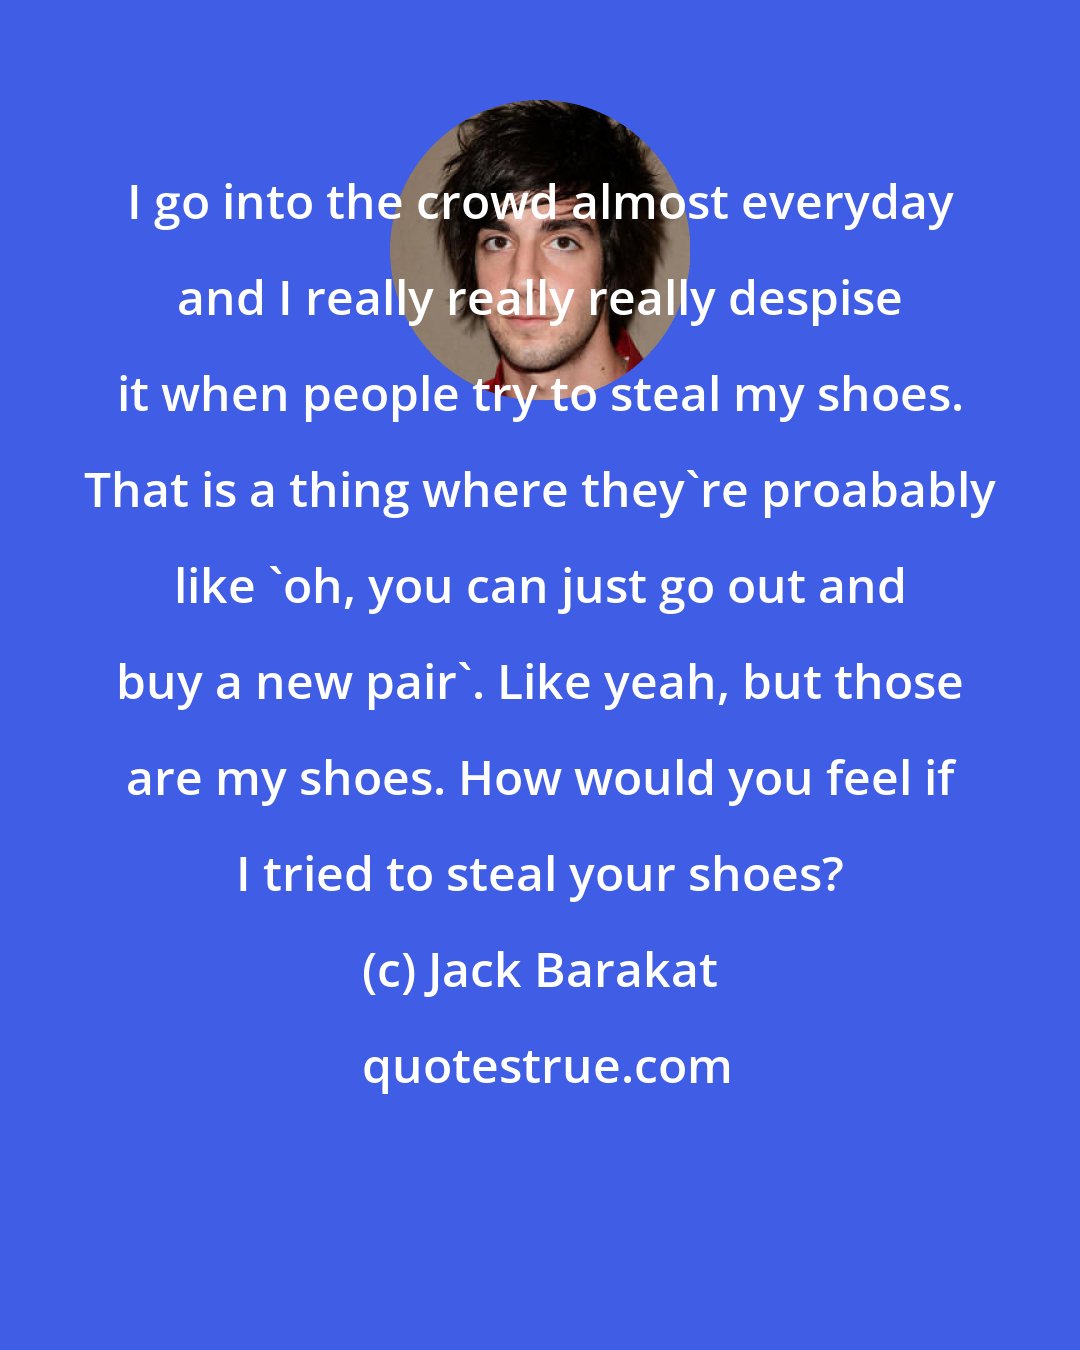 Jack Barakat: I go into the crowd almost everyday and I really really really despise it when people try to steal my shoes. That is a thing where they're proabably like 'oh, you can just go out and buy a new pair'. Like yeah, but those are my shoes. How would you feel if I tried to steal your shoes?